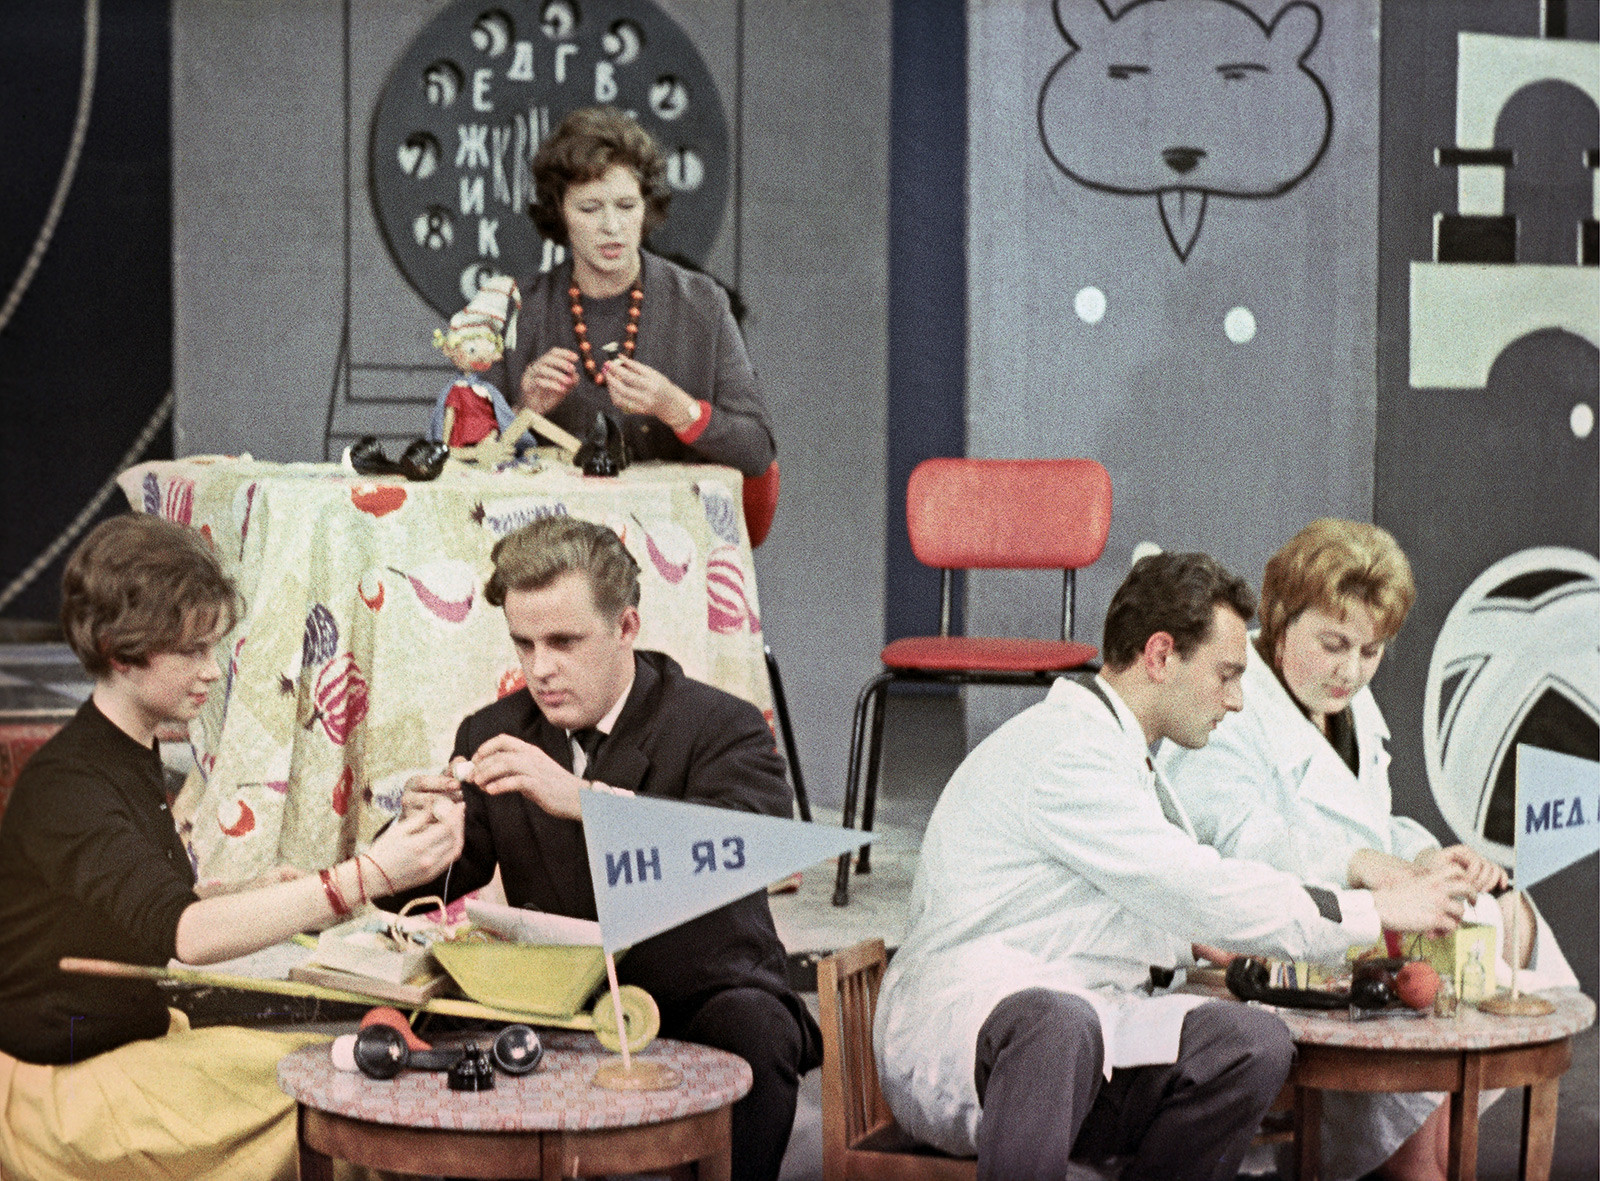 One of the first KVN shows aired back in the 60s. Right now it's hard to tell what exactly was going on there, perhaps some tech-kind competition.